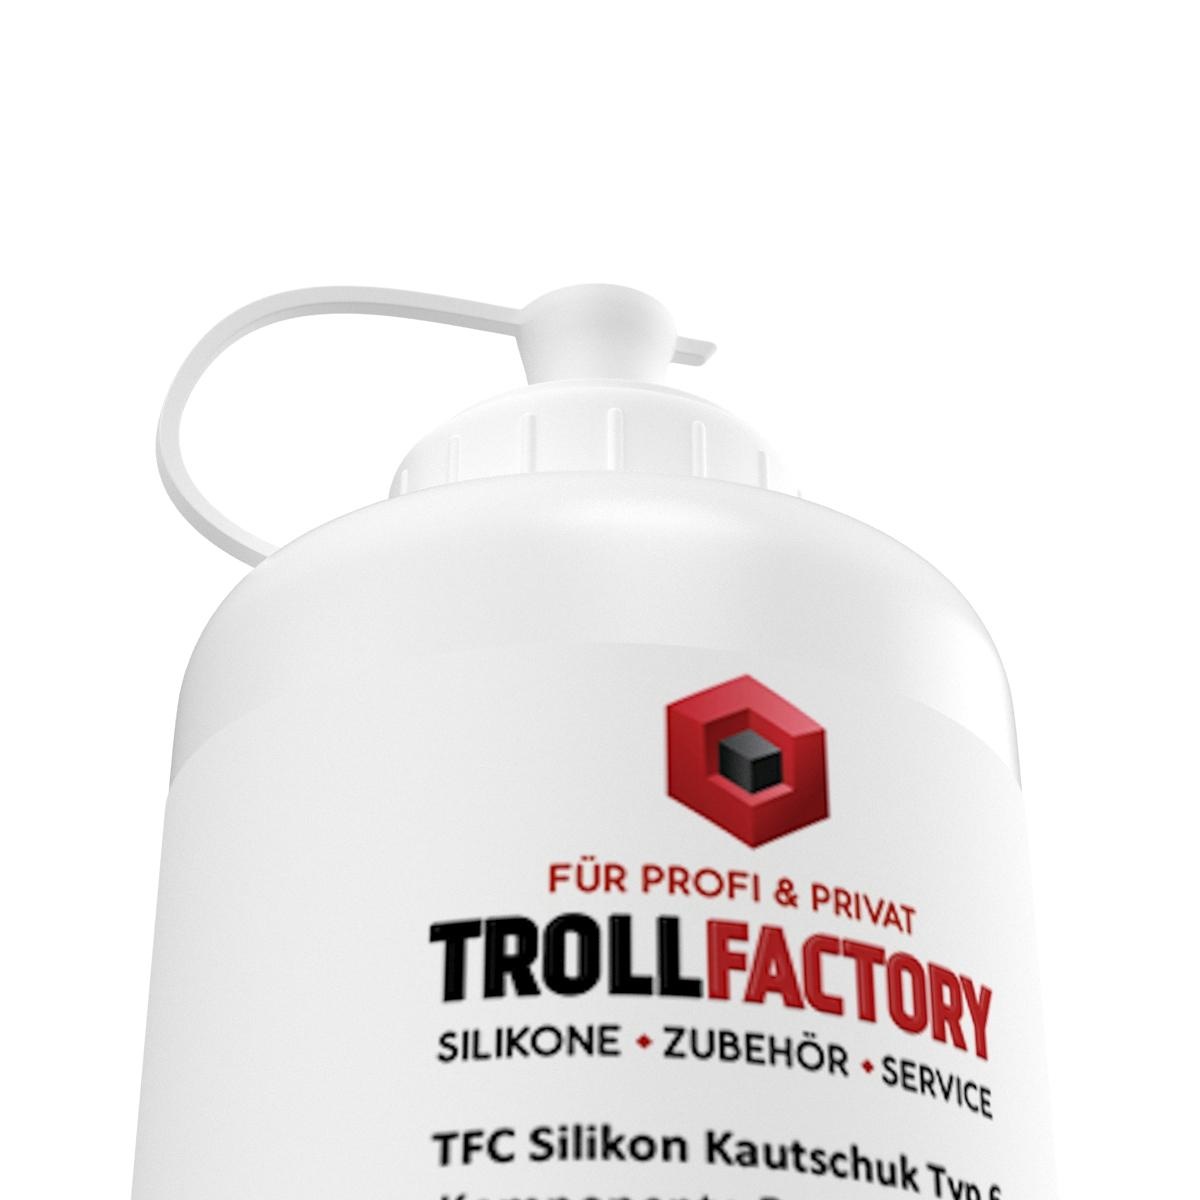 Troll Factory TFC Troll Factory Silicone Rubber Type 6 Voedsel 2000g